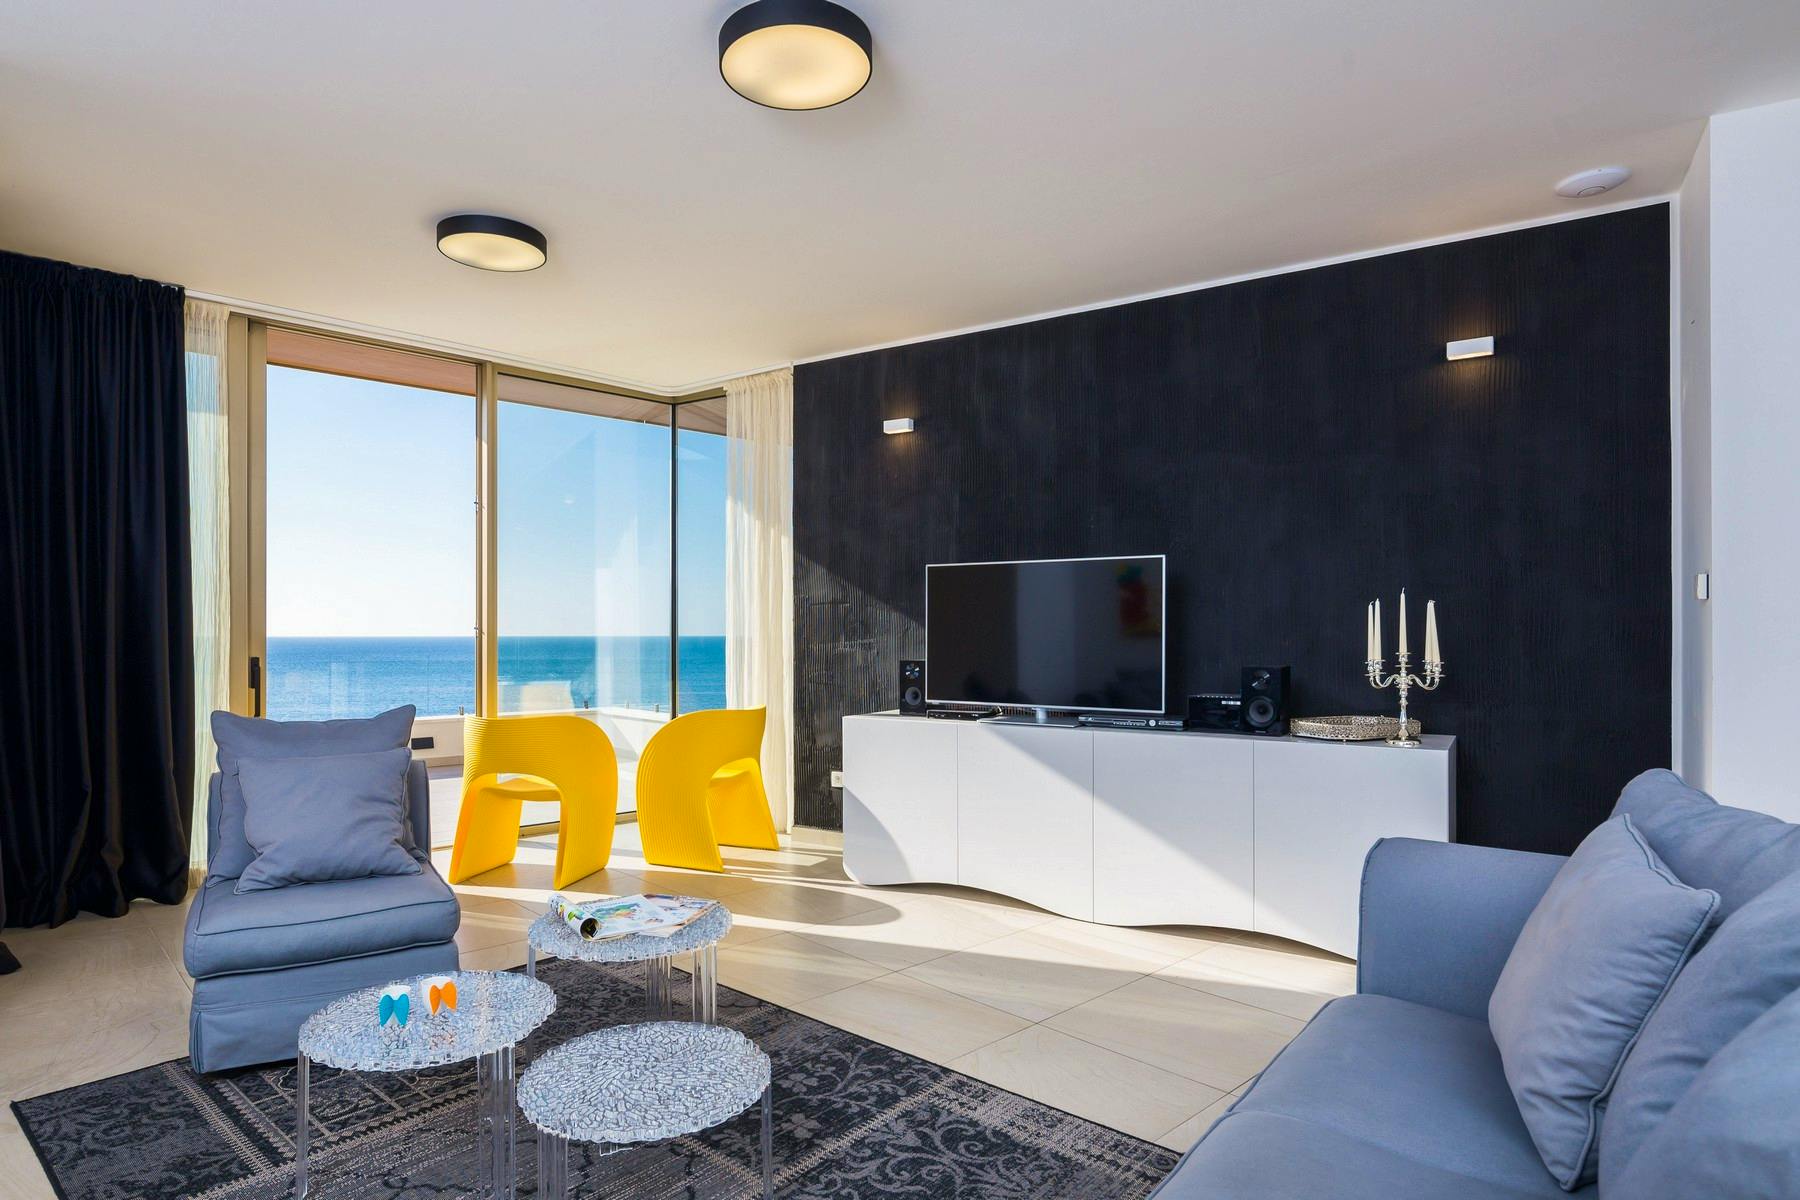 Living room offers open sea view